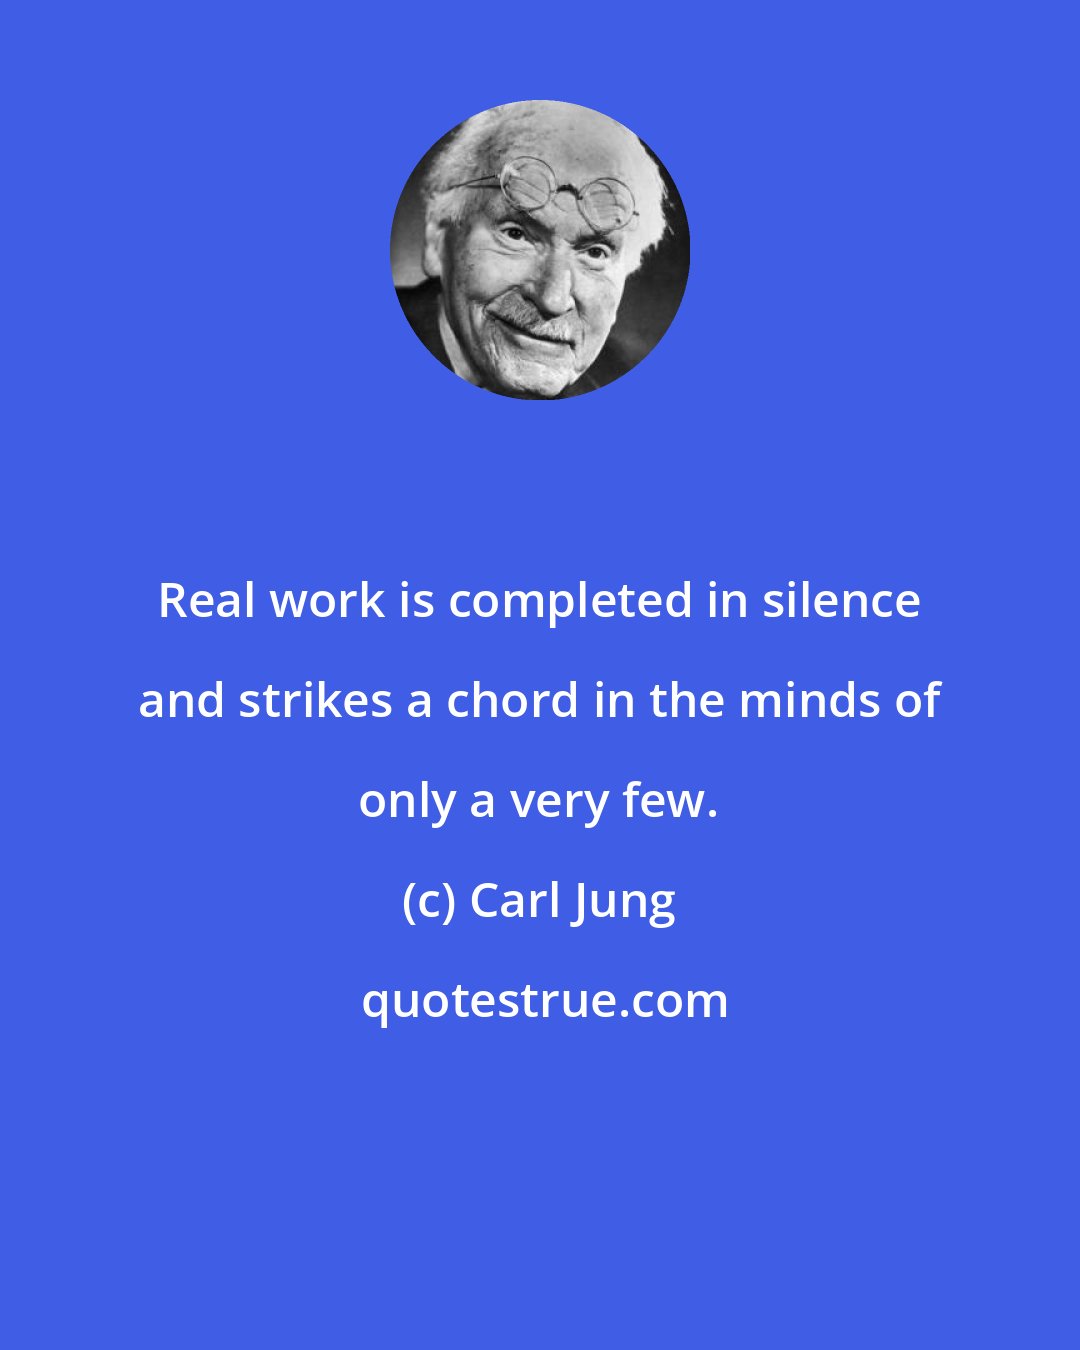 Carl Jung: Real work is completed in silence and strikes a chord in the minds of only a very few.